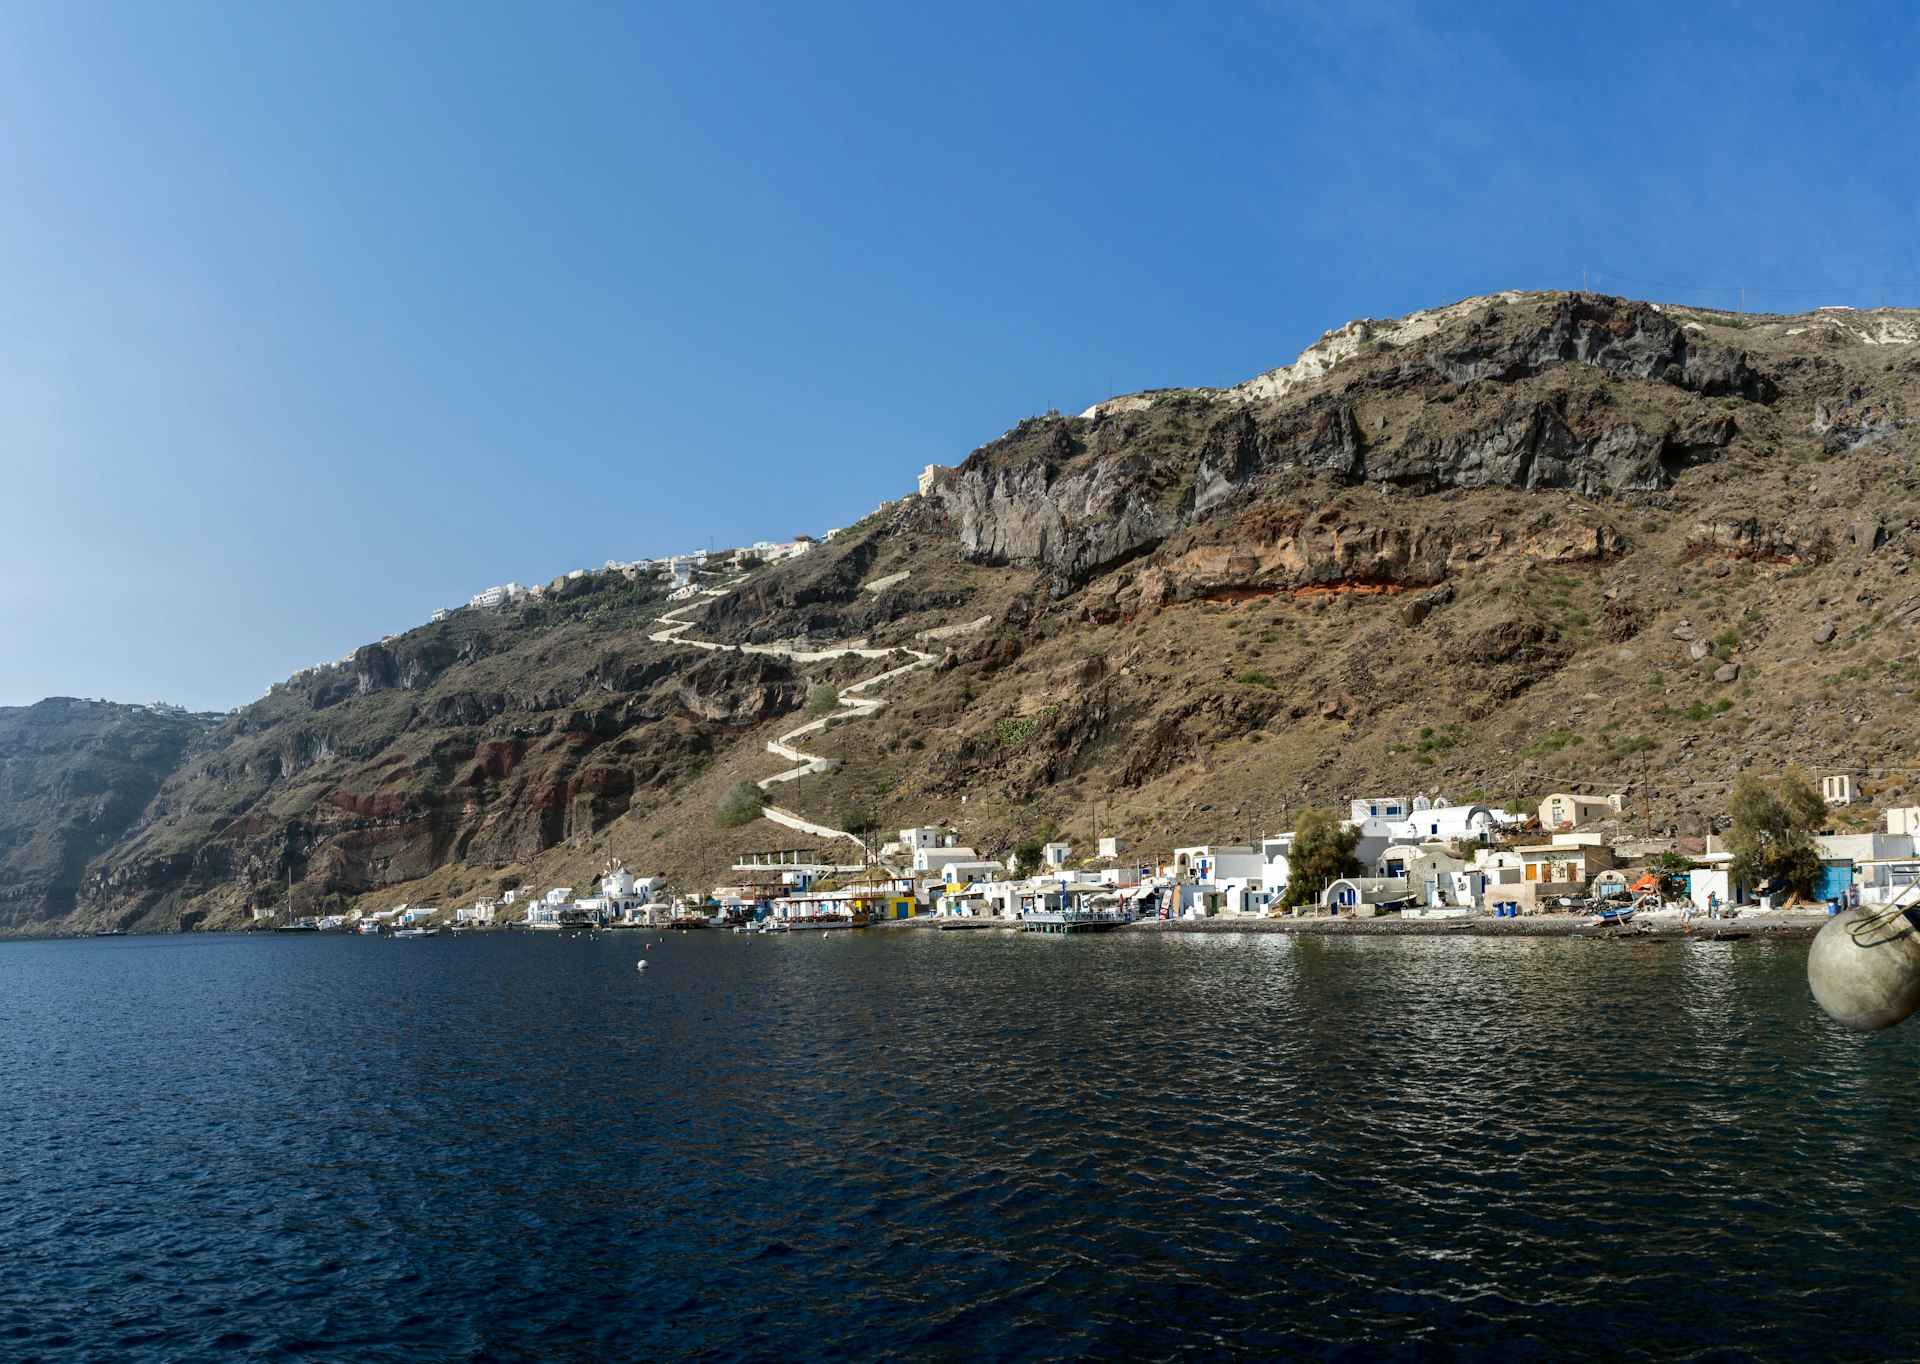 A shot taken from sea towards a volcanic island, with whitewashed houses lining the shore. A winding path weaves down the hill towards the village